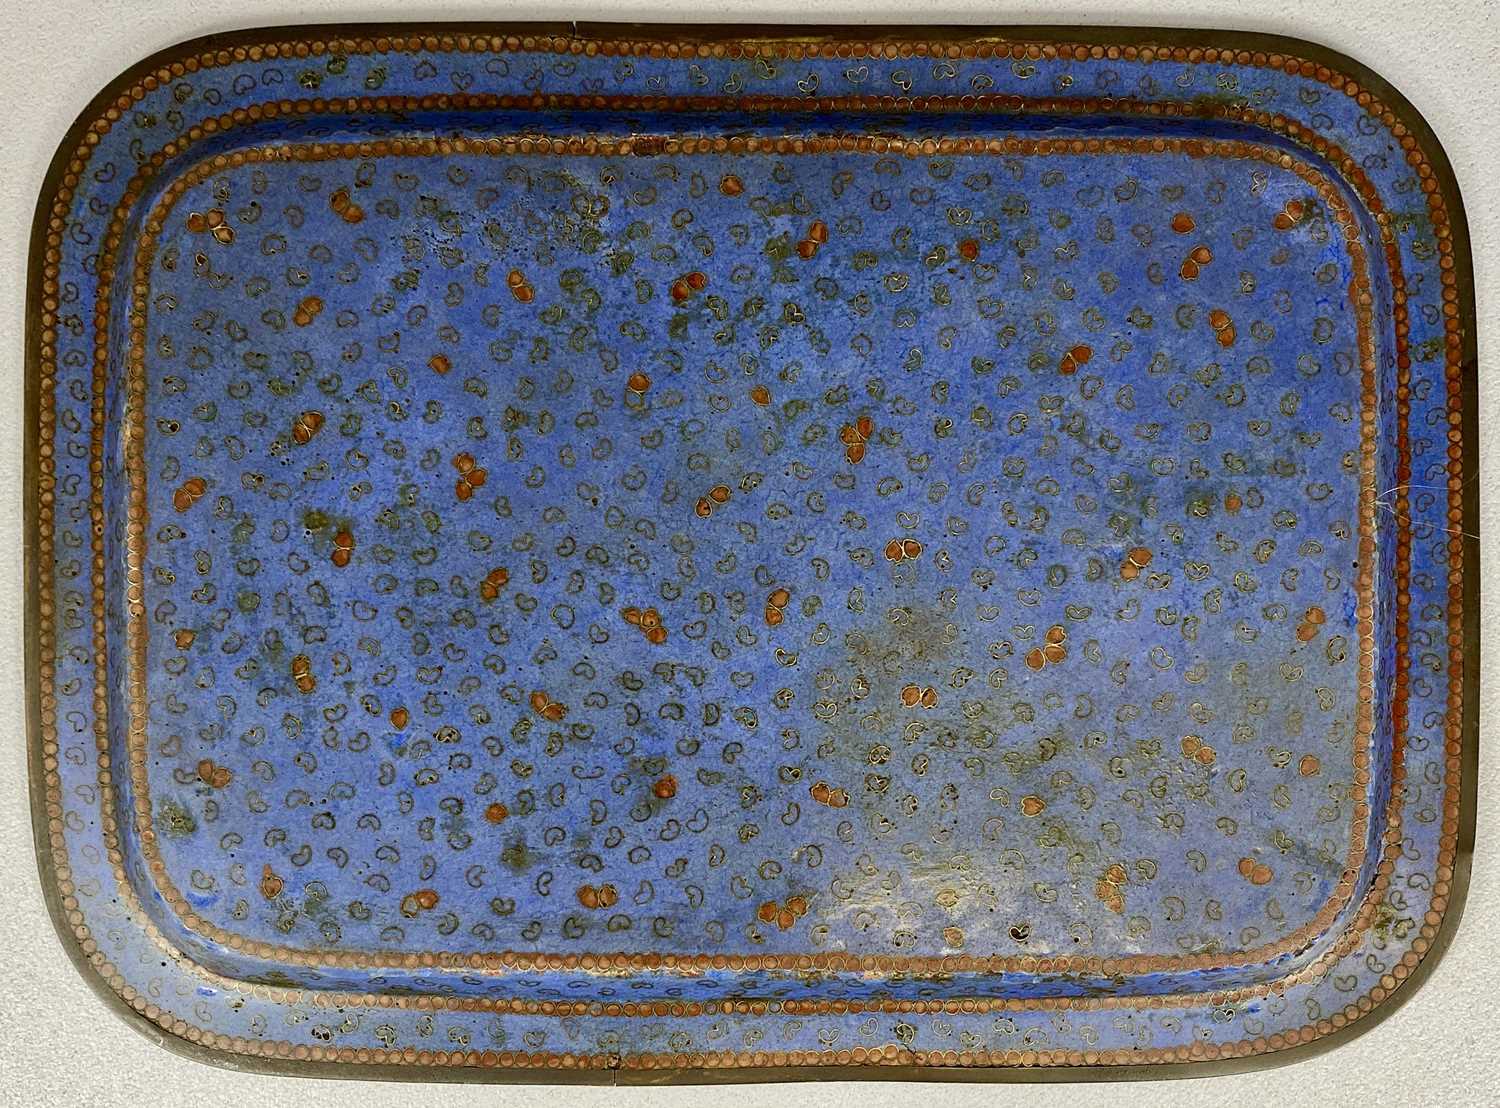 19TH CENTURY CHINESE CLOISONNE TRAY, rectangular with rounded corners, decorated with flowering